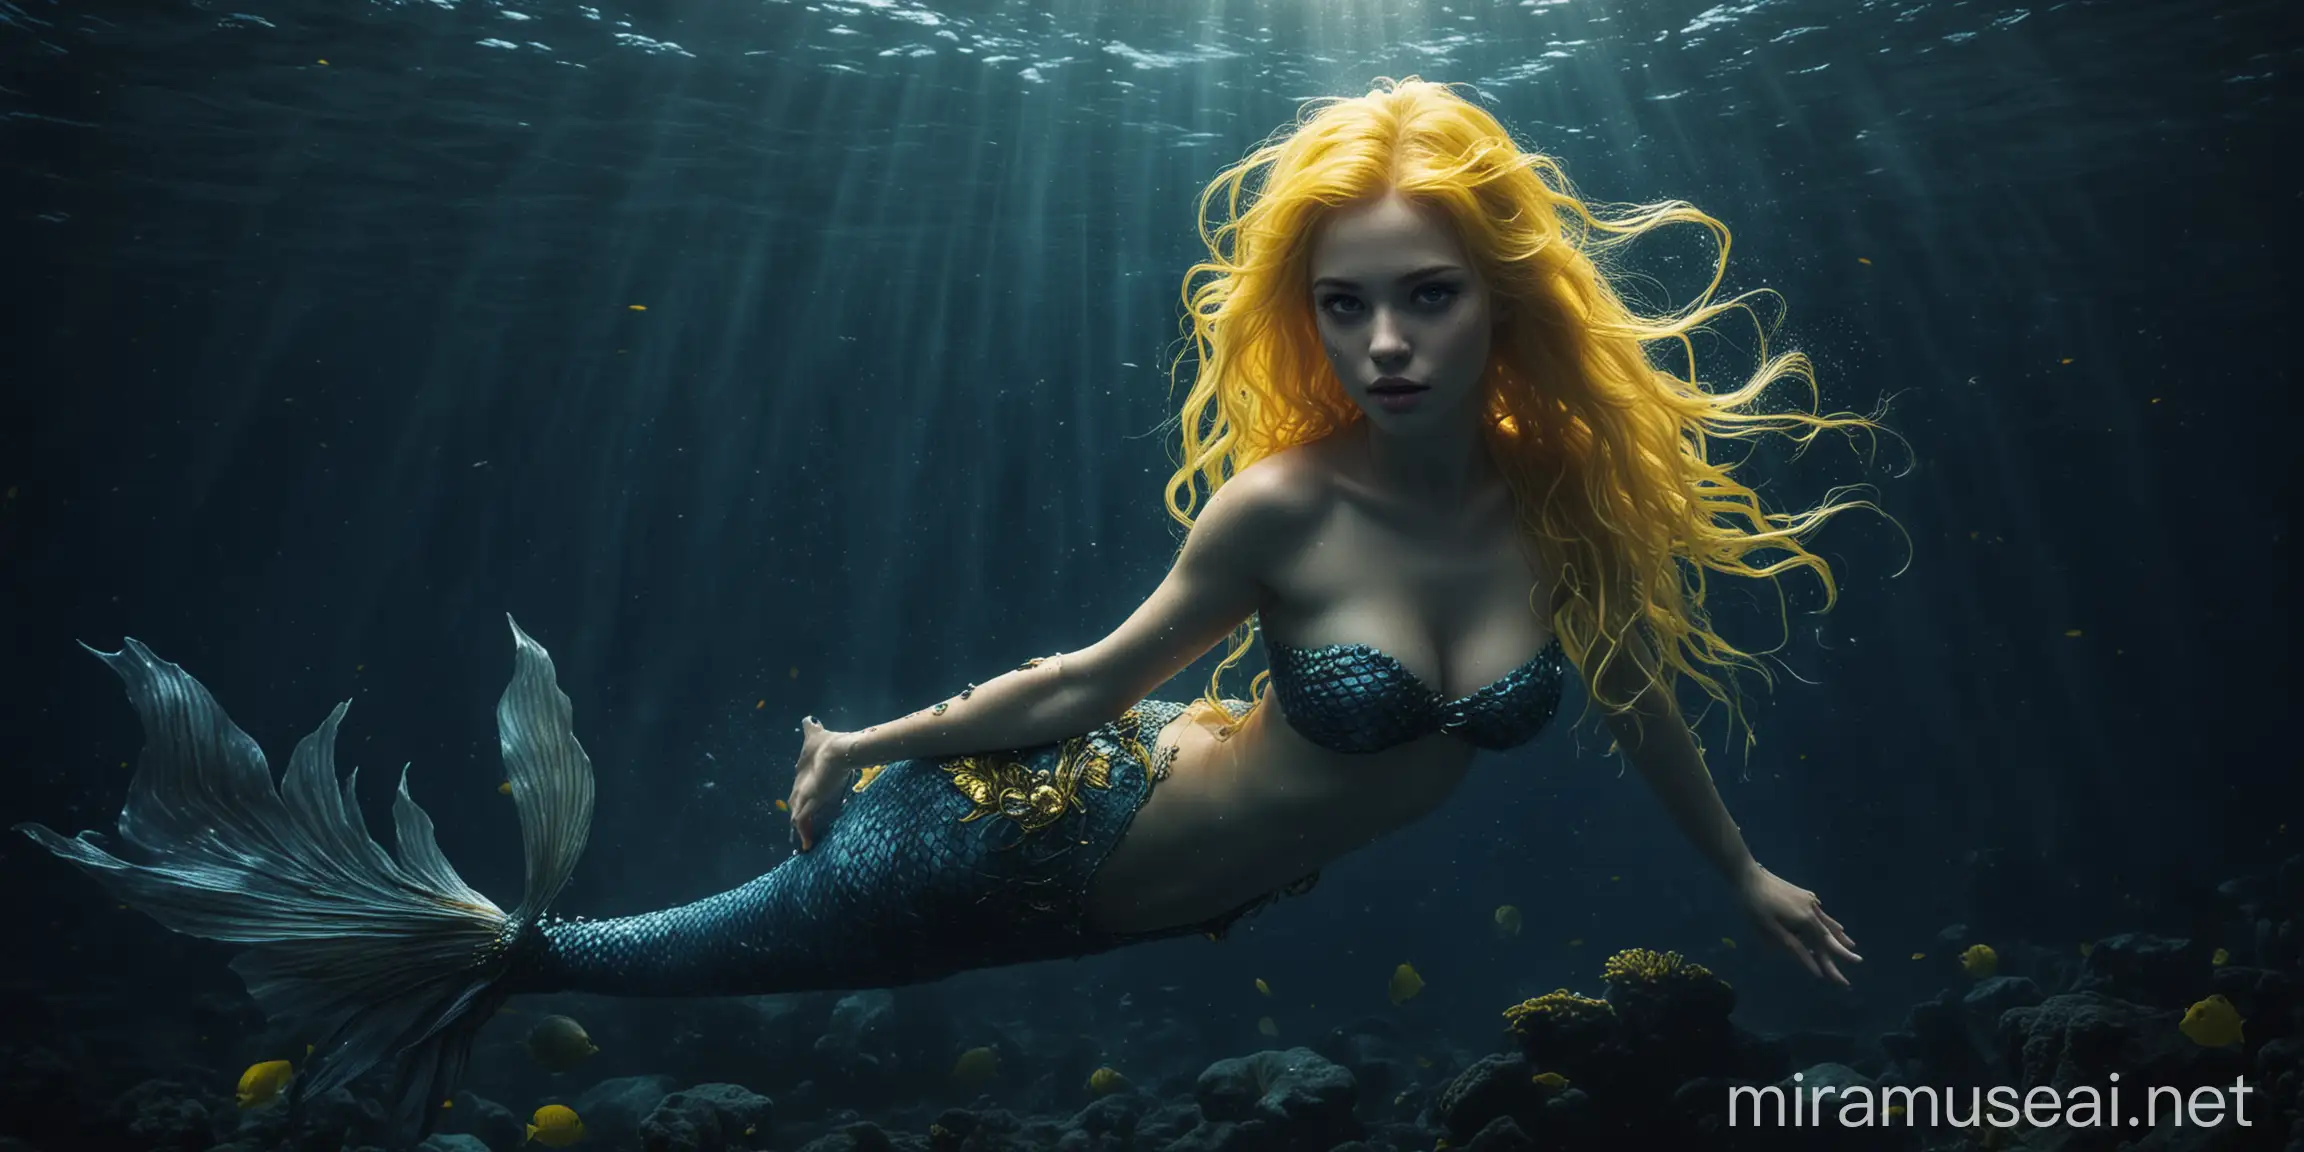 Enchanting Mermaid with Golden Hair in Deep Blue Abyss